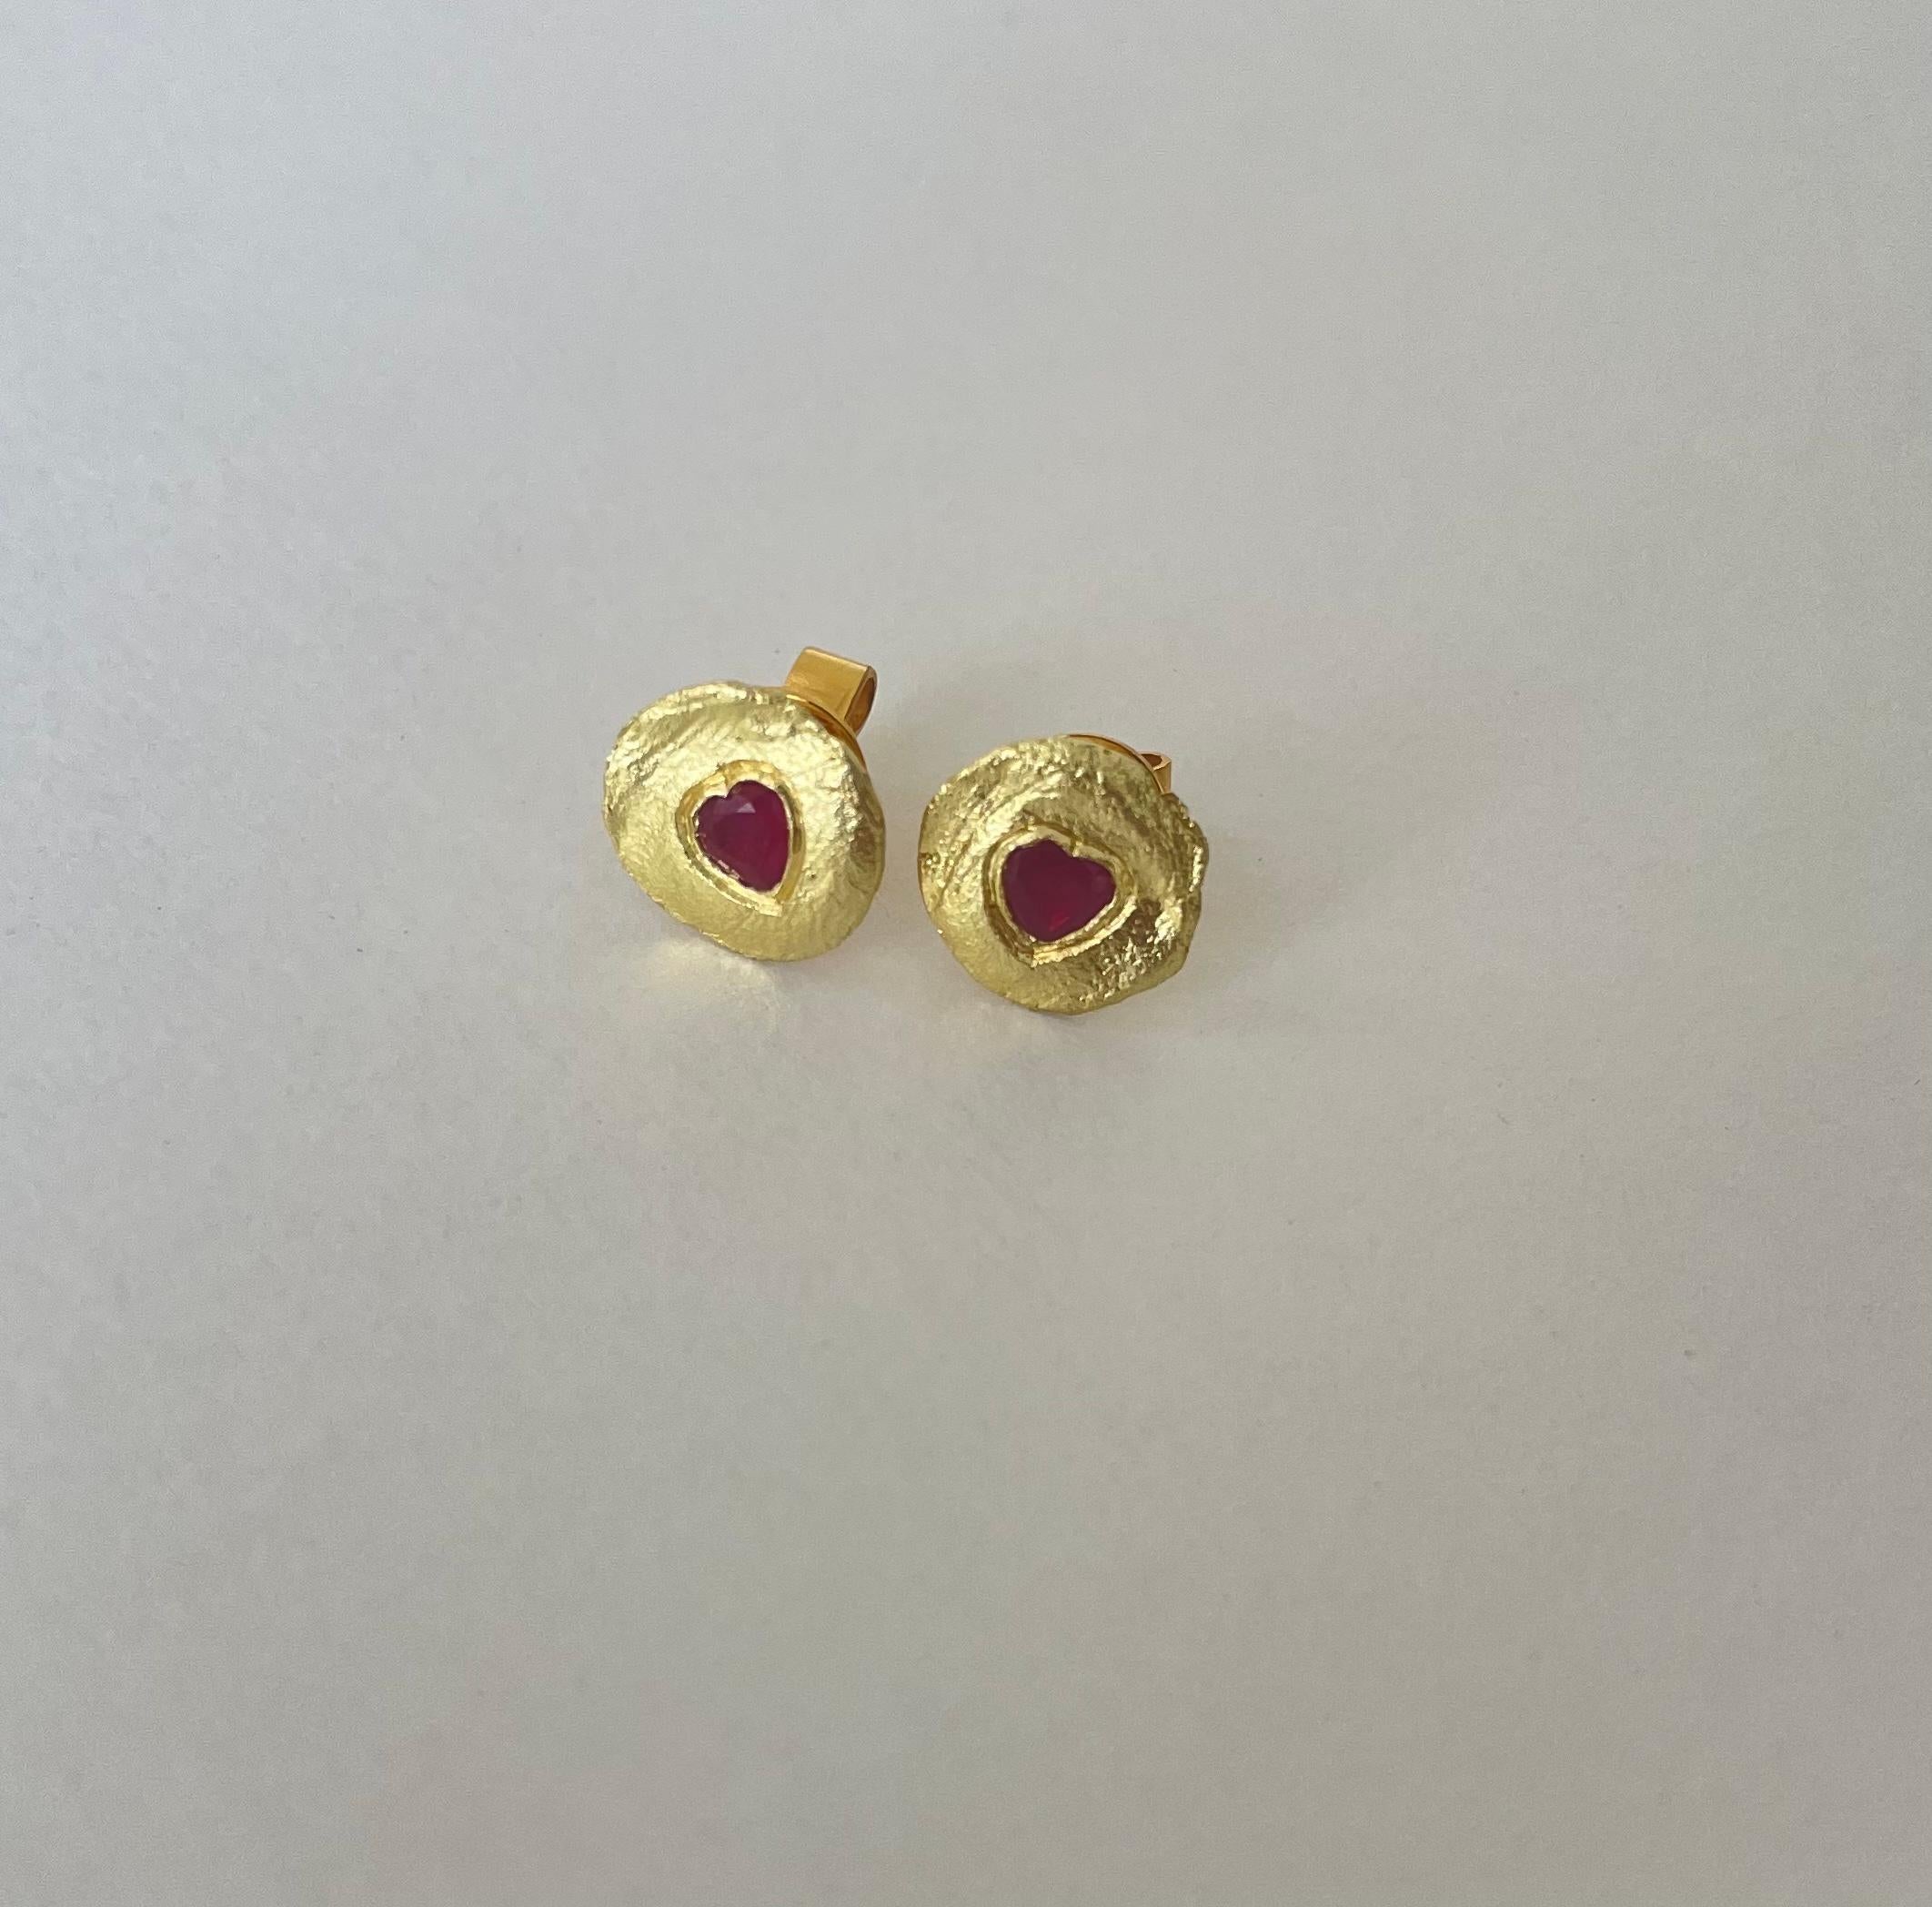 These elegant Valentine’s Disc Earrings feature a sparkling 18k gold ruby stone in the center, surrounded by a graceful disc with a bezel setting. The disc is intricately crafted with a fluid, openwork design, giving the earrings a light and airy